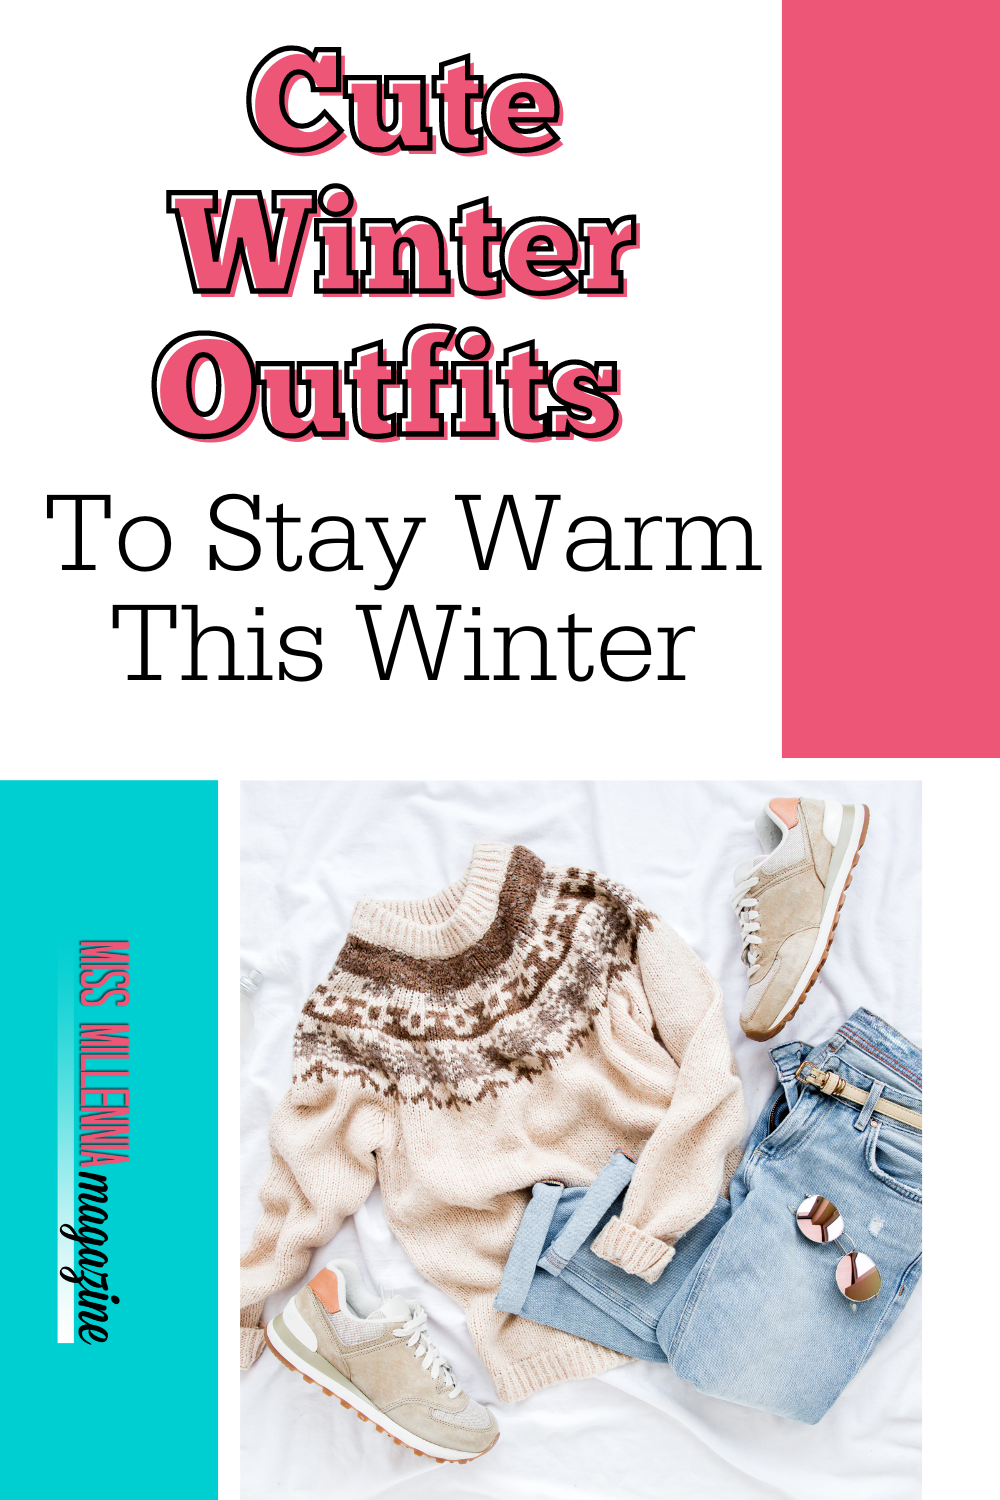 Cute Winter Outfits To Stay Warm This Winter